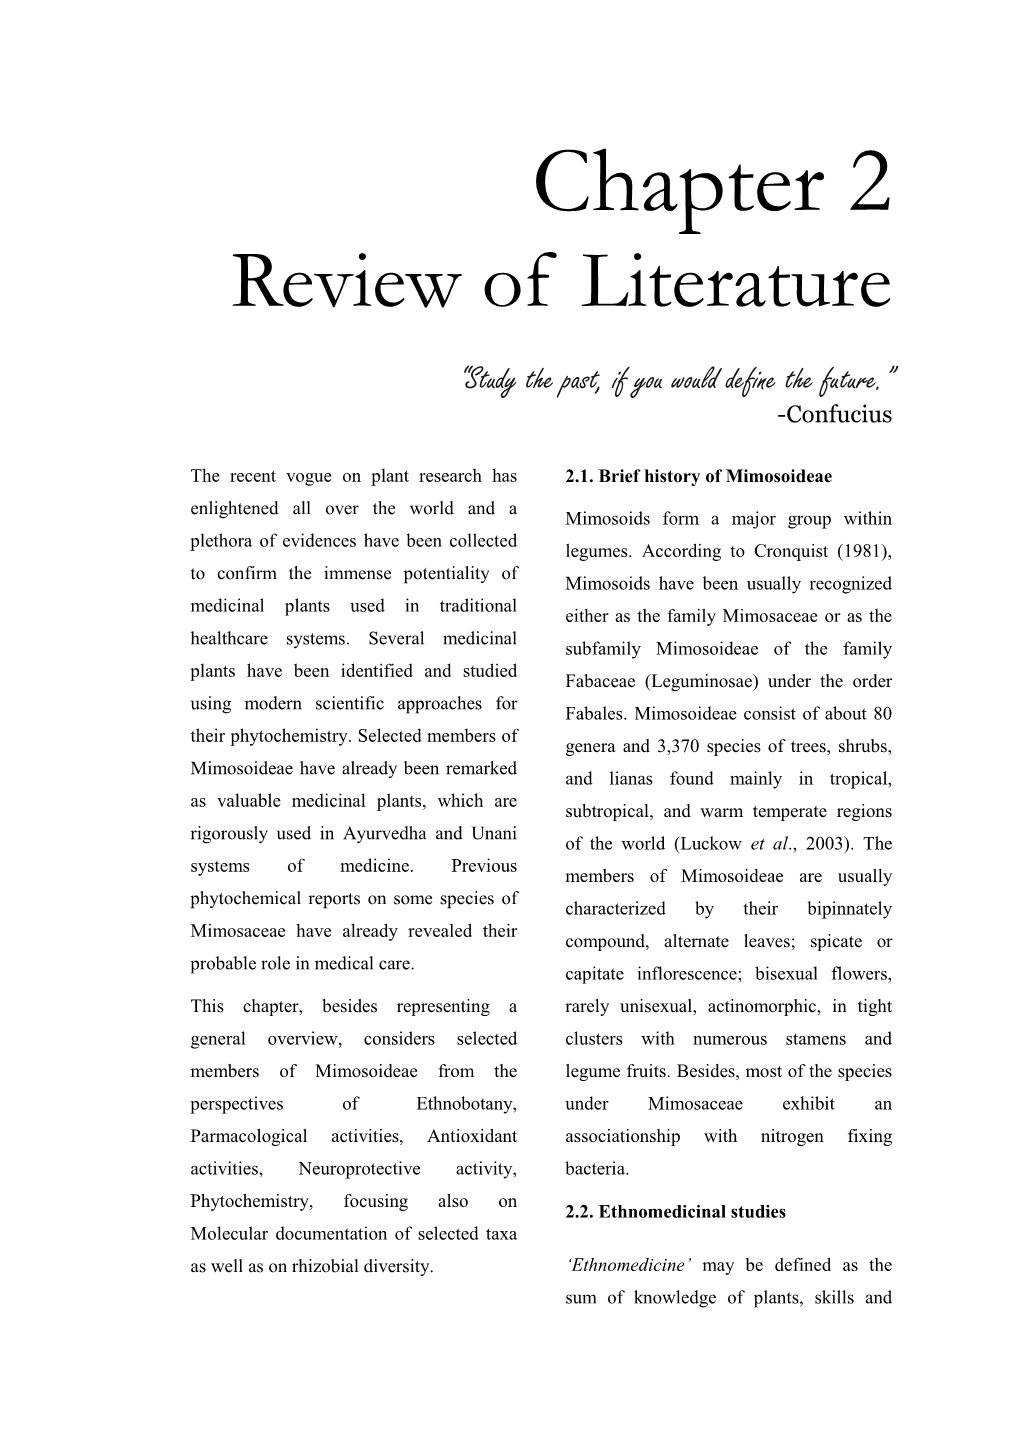 Chapter 2 Review of Literature